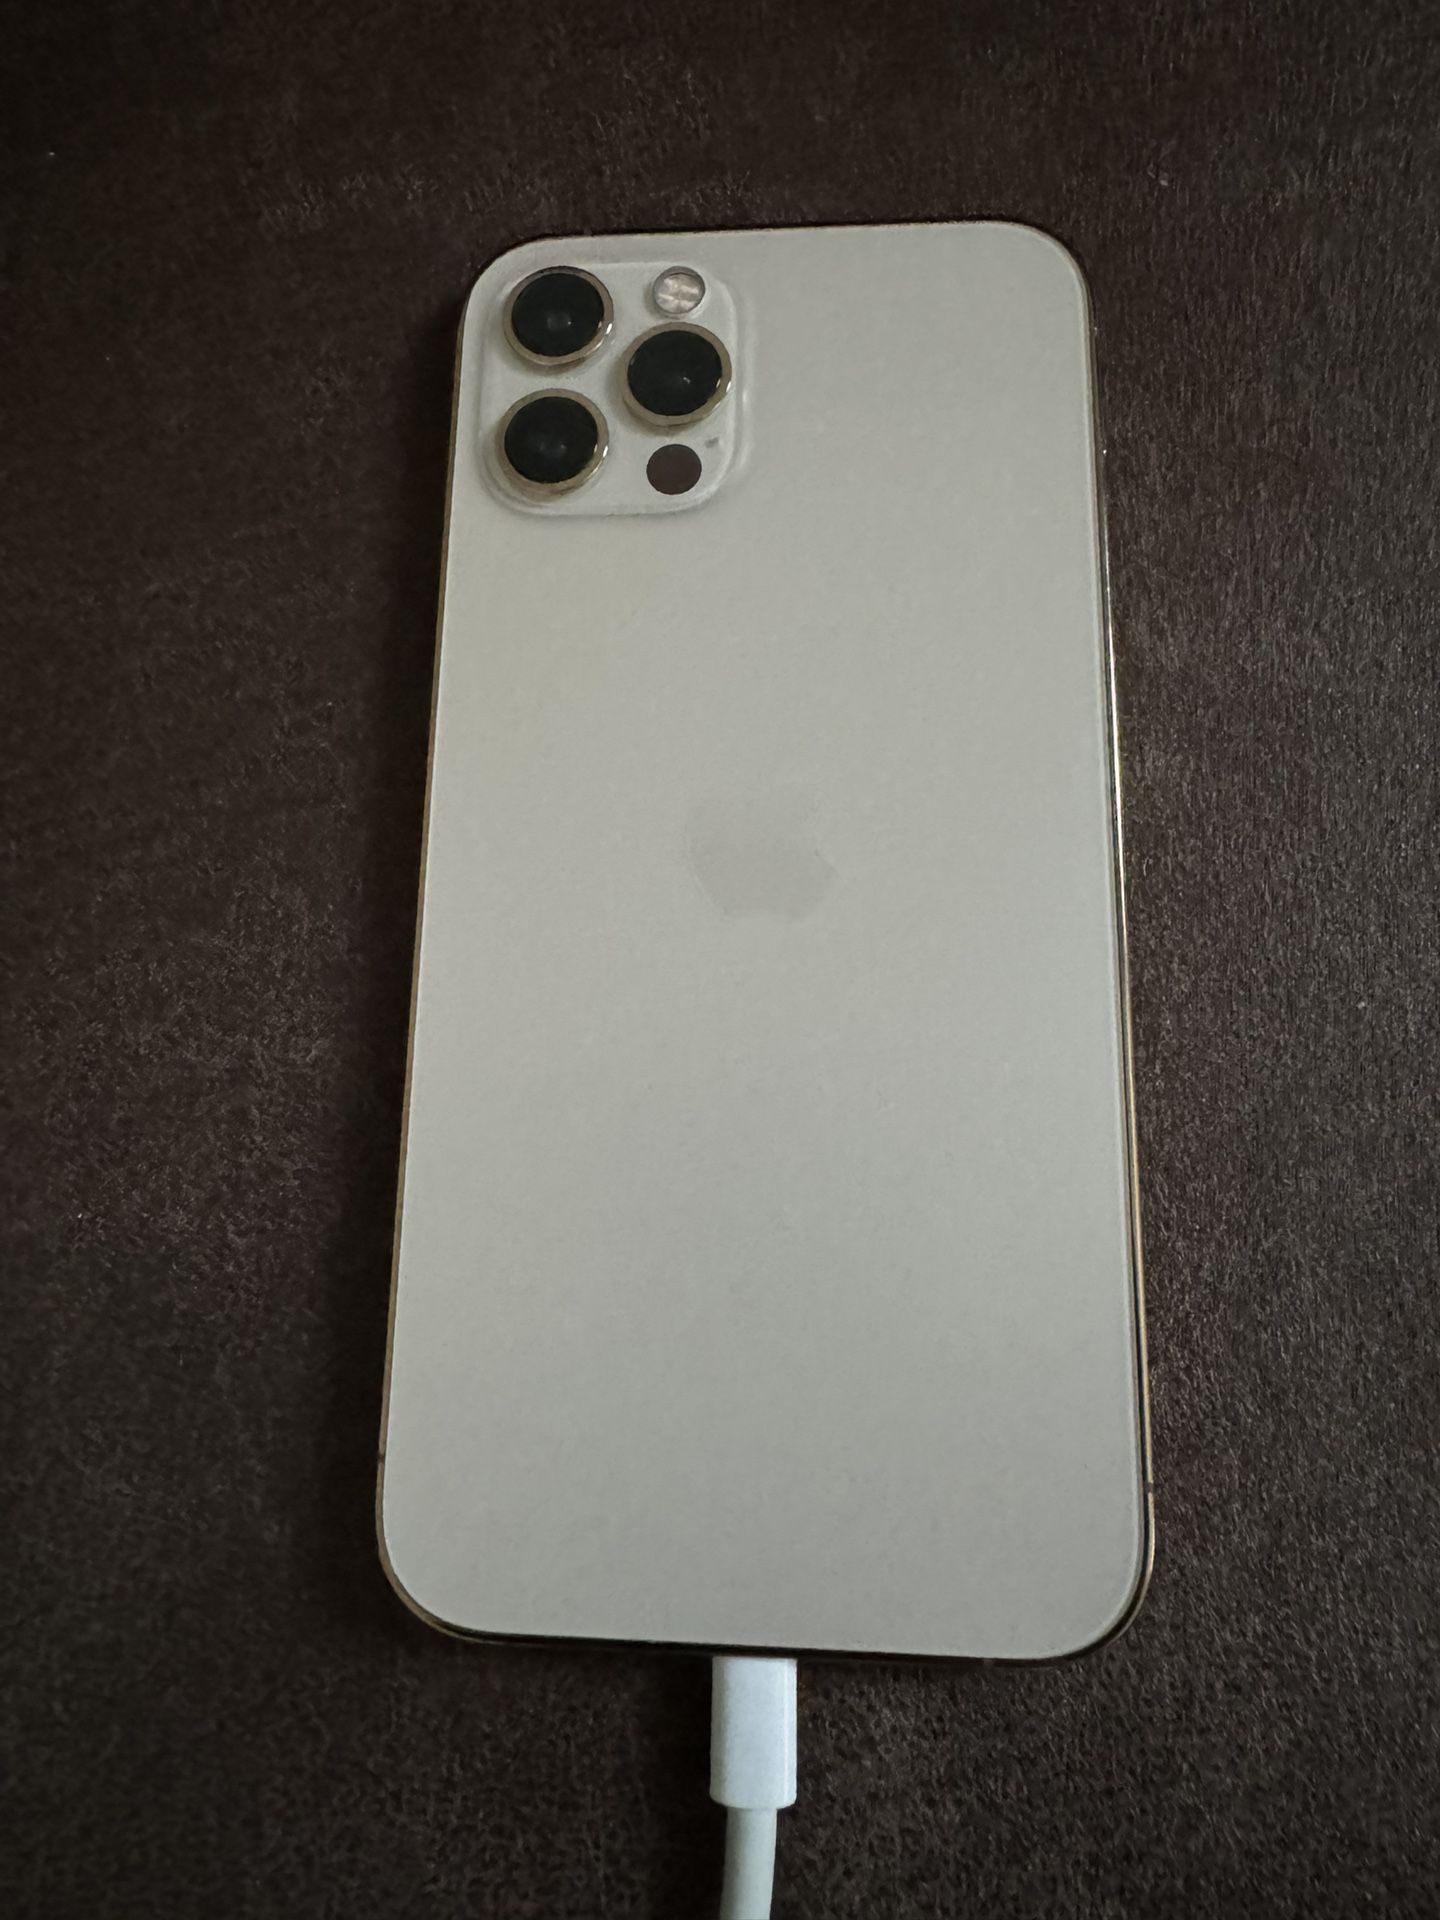 iPhone 12 Pro 128gb Gold Unlocked From AT&T